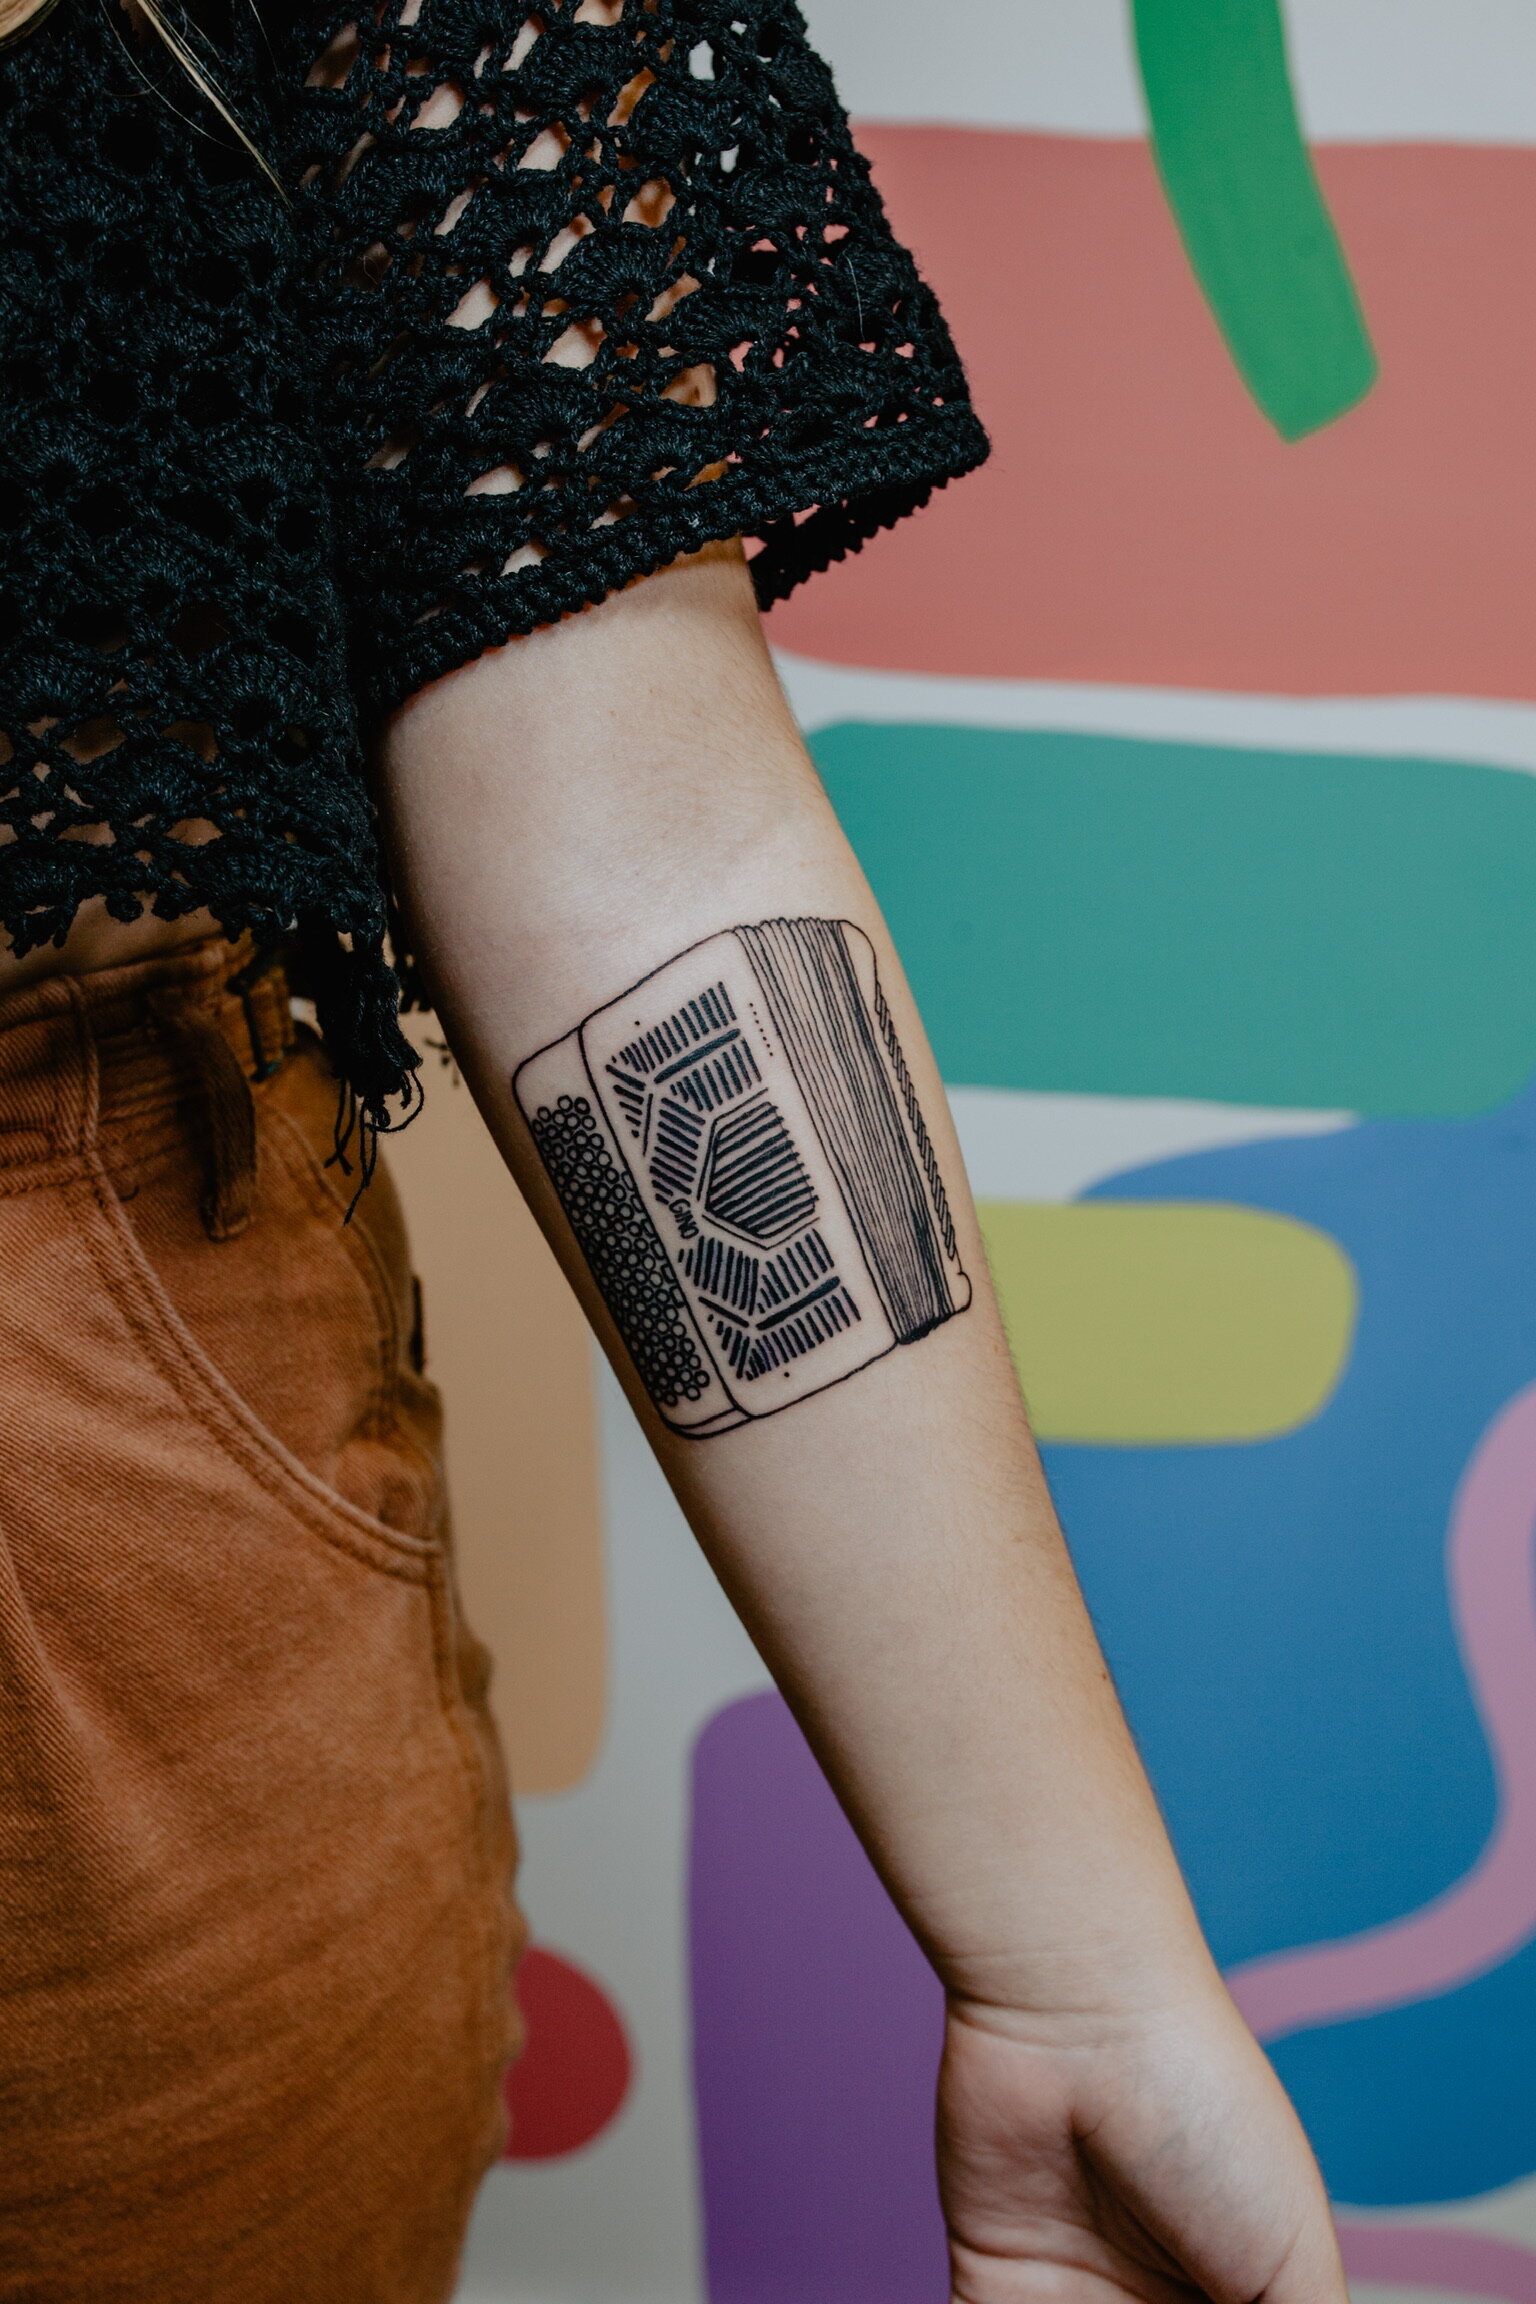 15032020 Seamless Joy divisions Unknown pleasures for itay   details nutsink joydivision unknownpleasures 1979 latepost  By  Tattoo Junction Nepal  Facebook